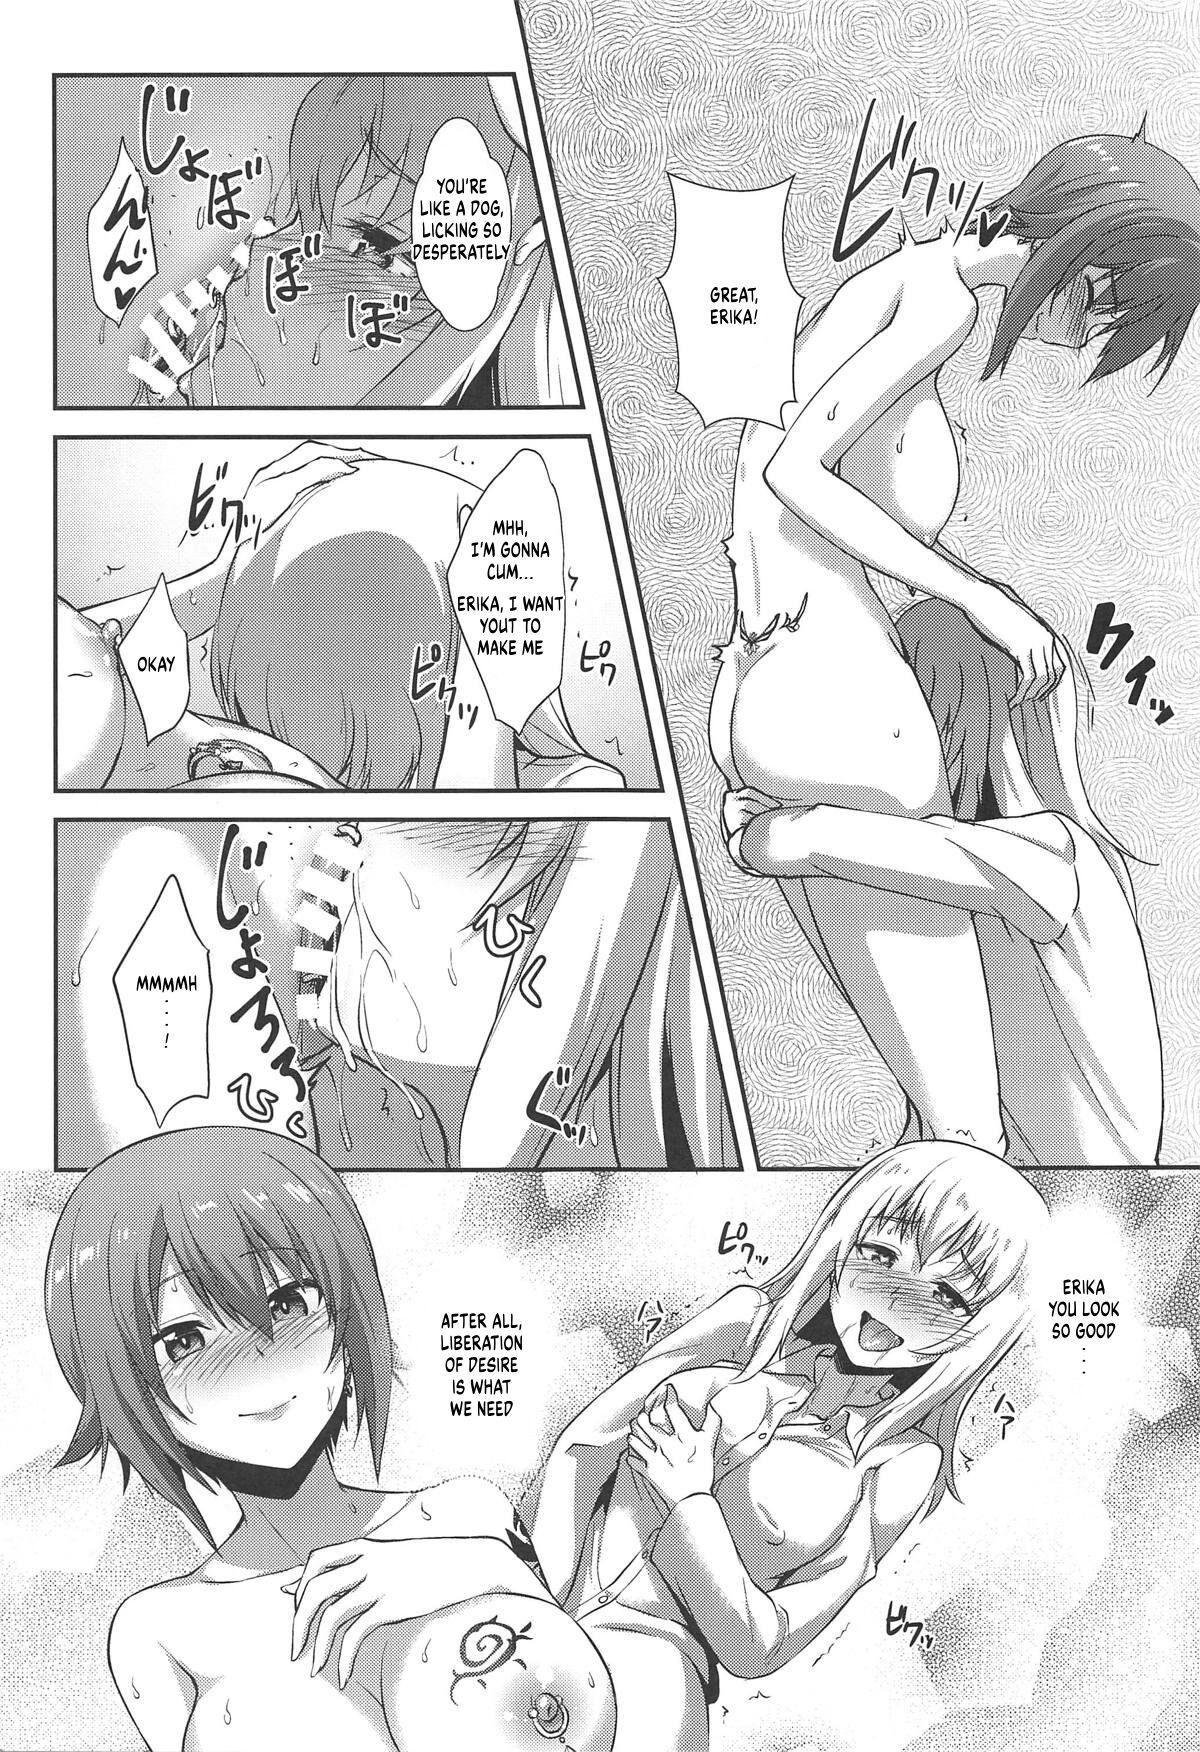 Deep Throat The Way How a Matriarch is Brought Up - Maho's Case, Bottom - Girls und panzer High Heels - Page 11